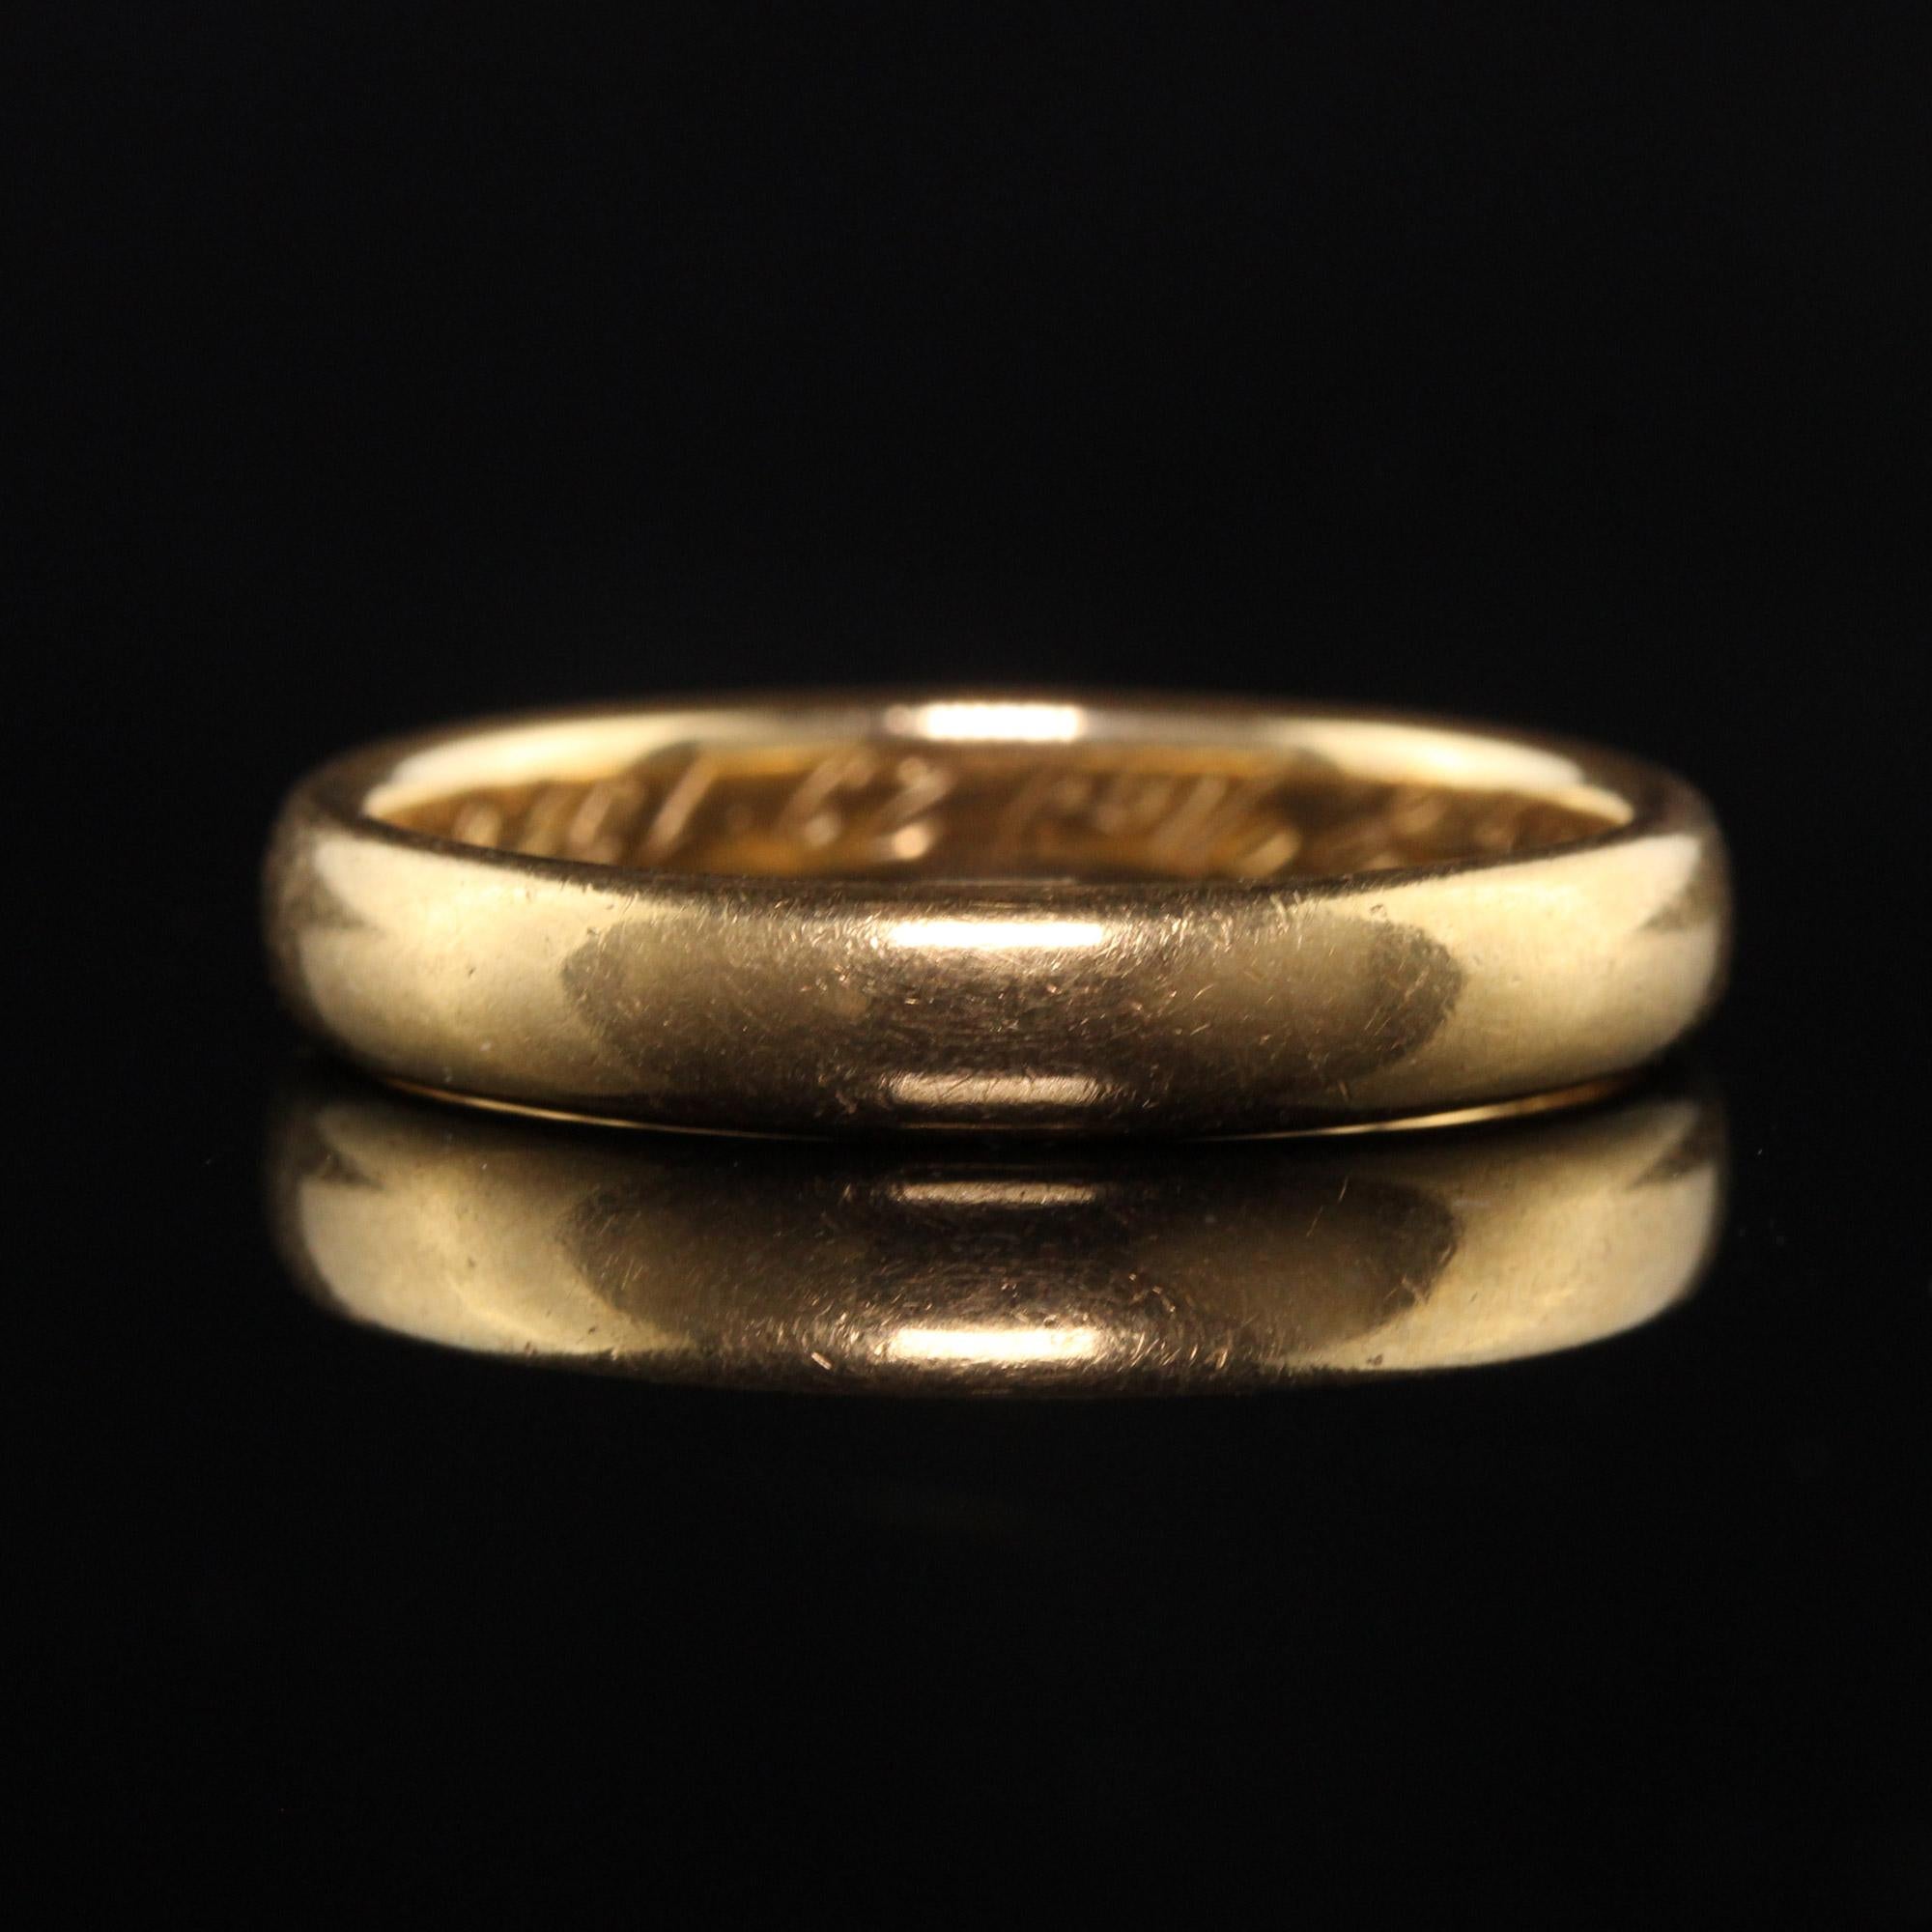 Antique Art Deco 18K Yellow Gold Engraved Wedding Band For Sale 1